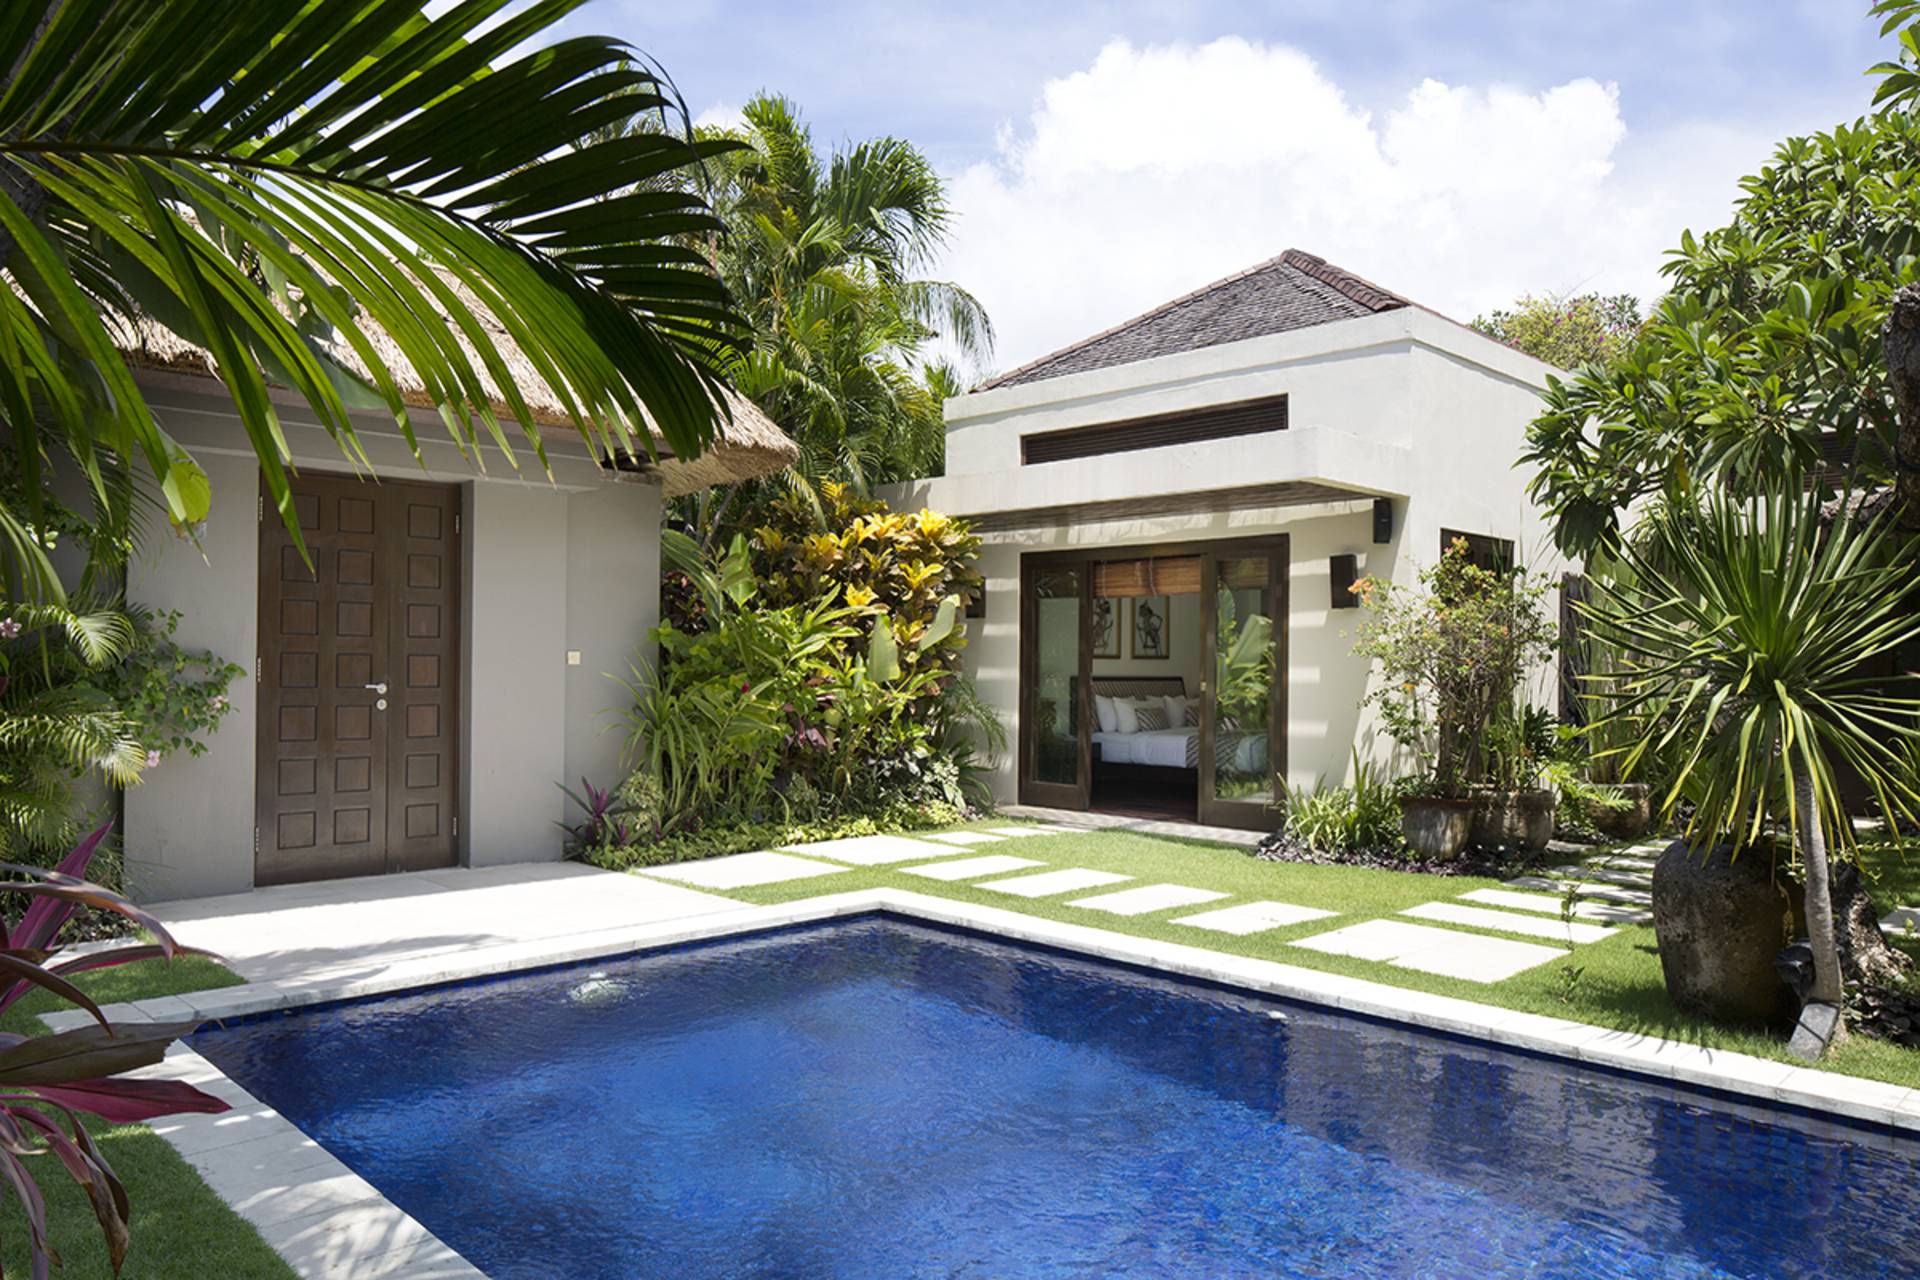 Monthly villa rental | villa & apartment in bali for any period with hombali.com